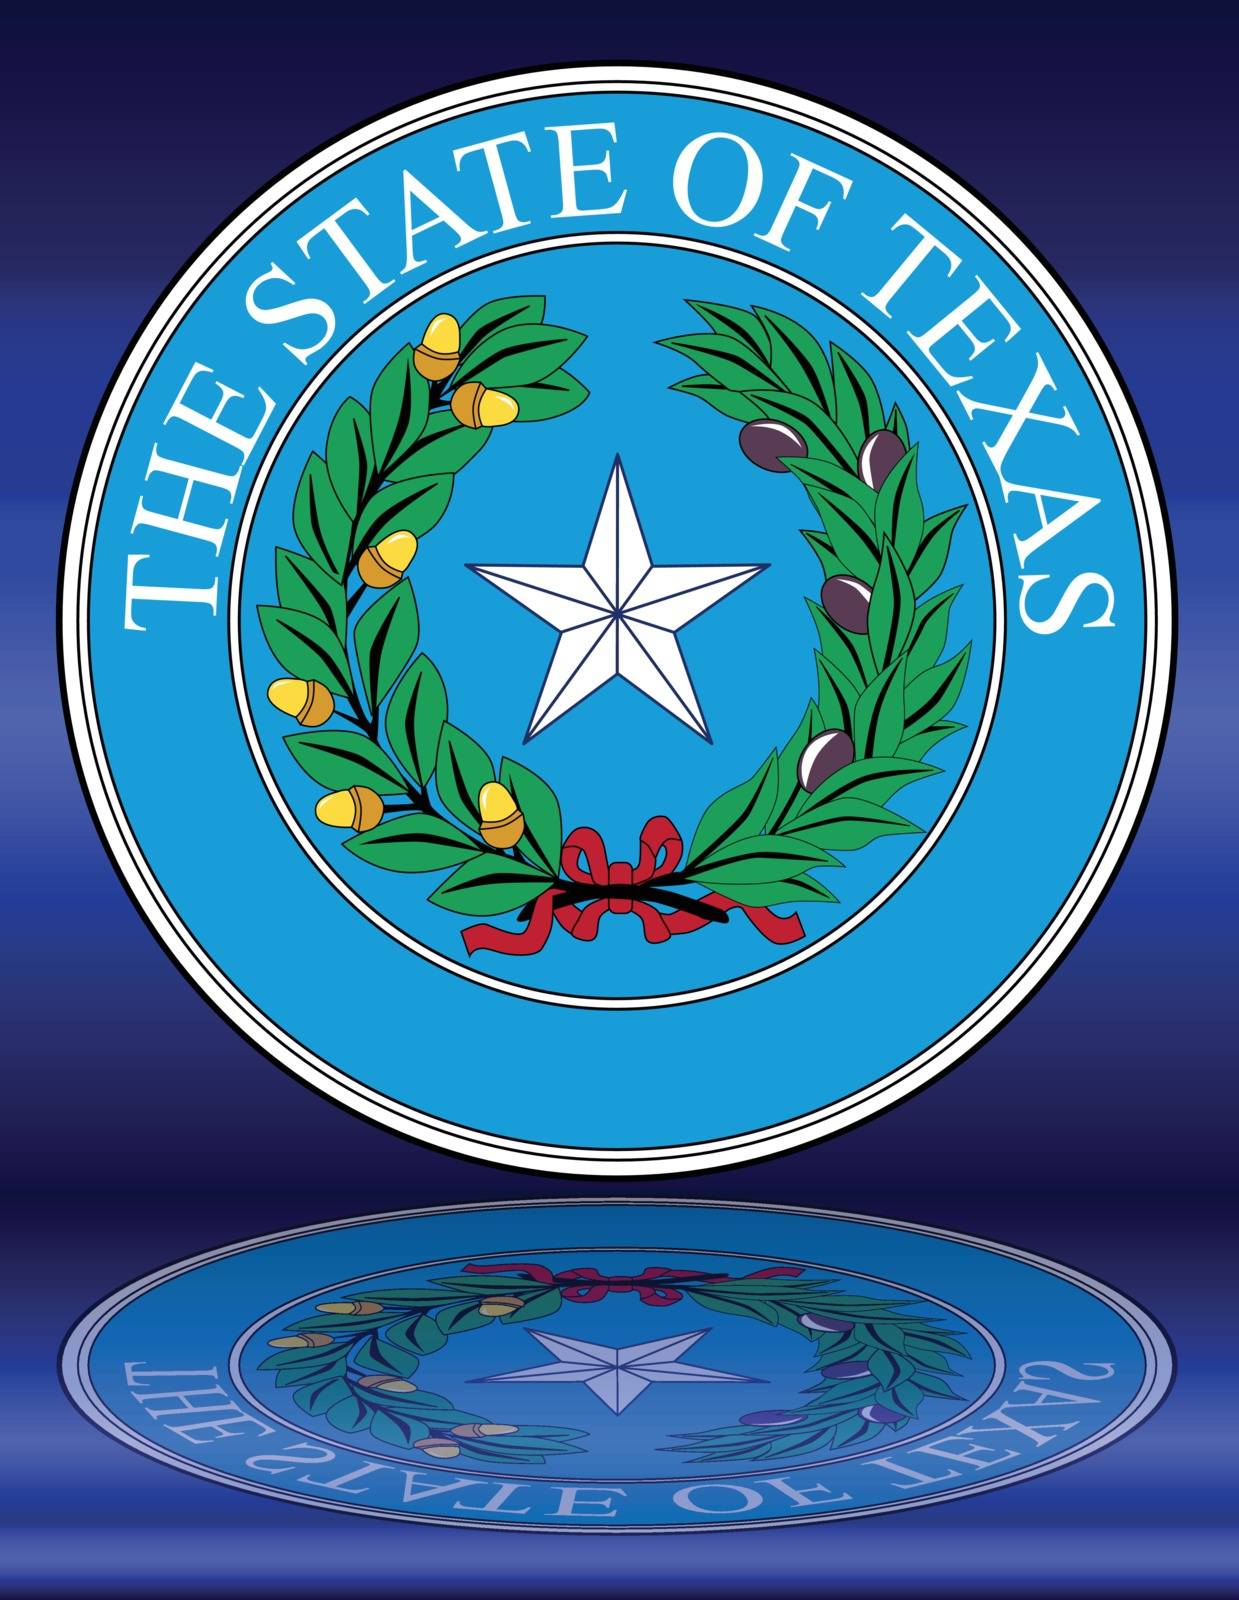 The seal of the United Steas of American state TEXAS with reflection